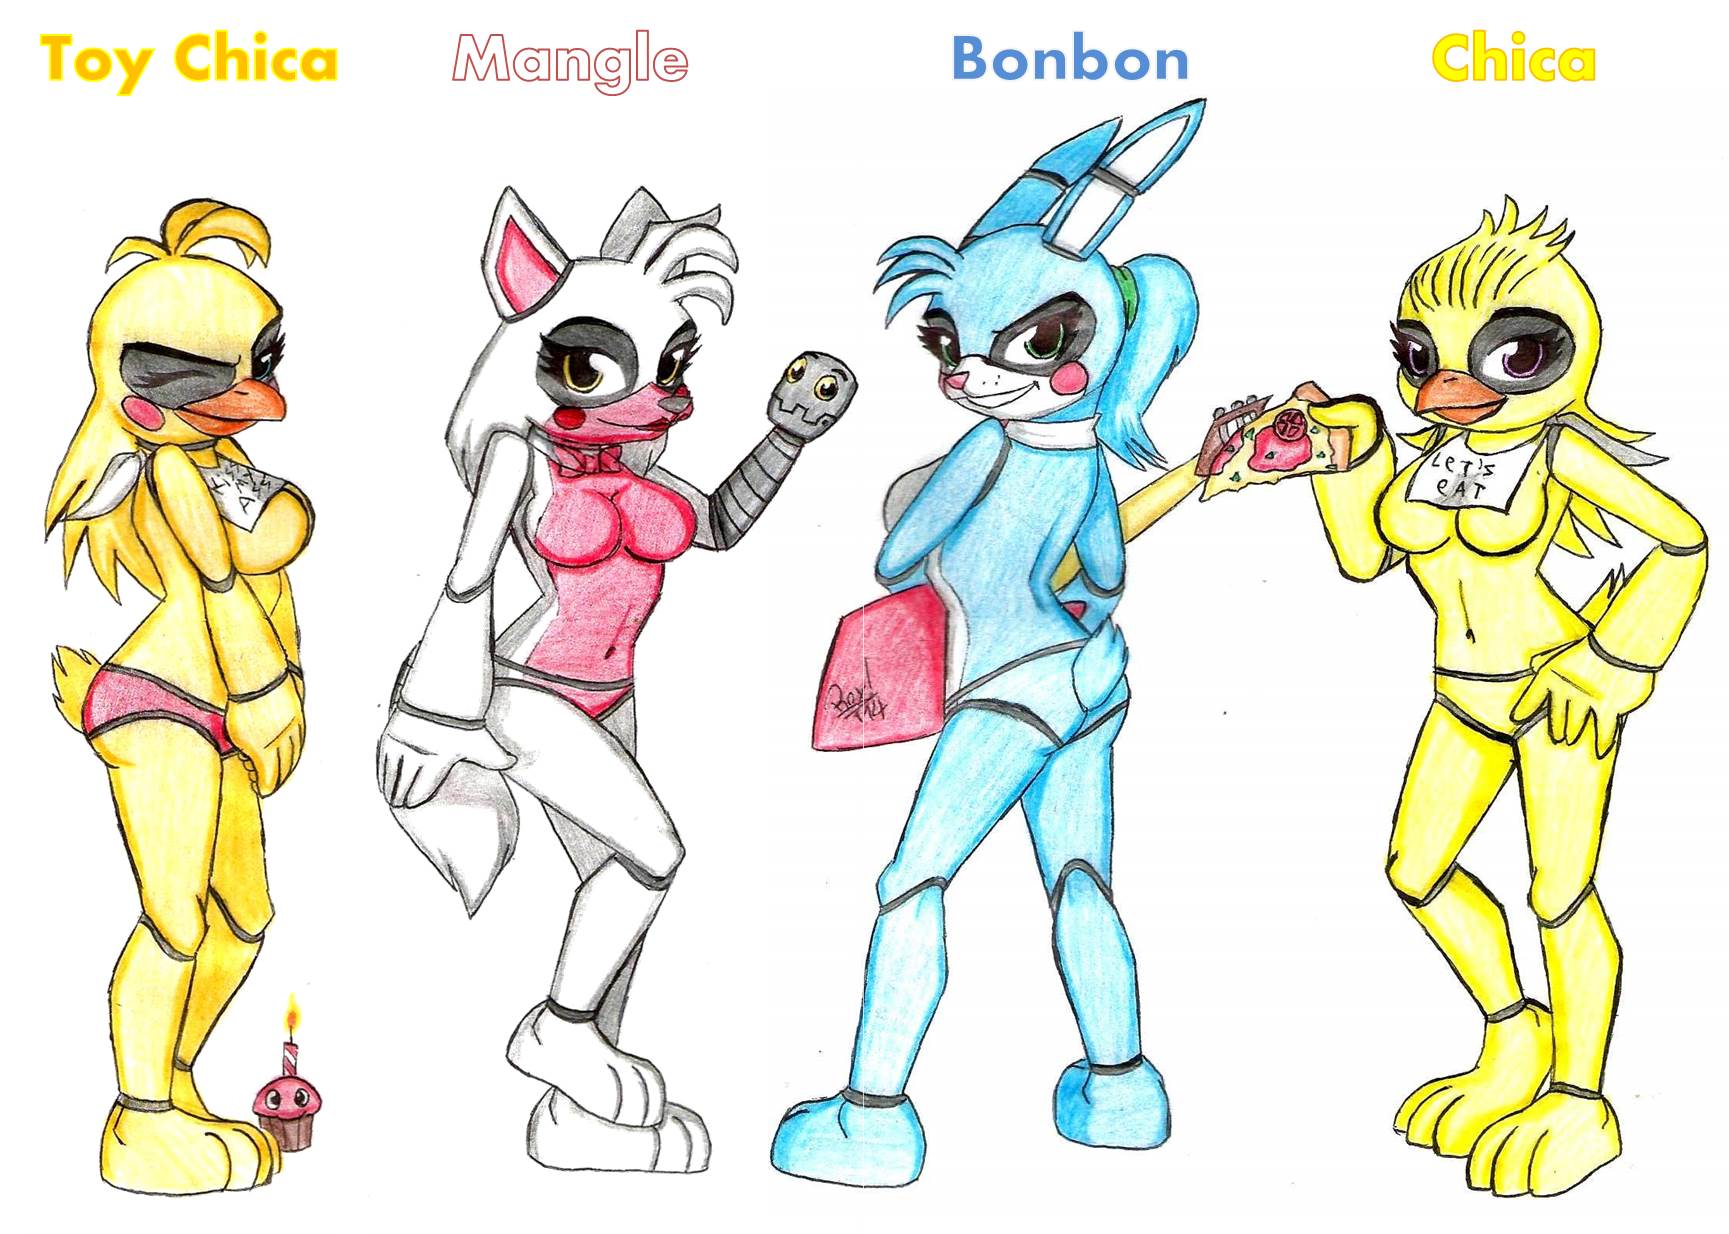 Toy Chica, Mangle, Bonbon and Chica /FNAF /FanArt by Roy-Land on DeviantArt